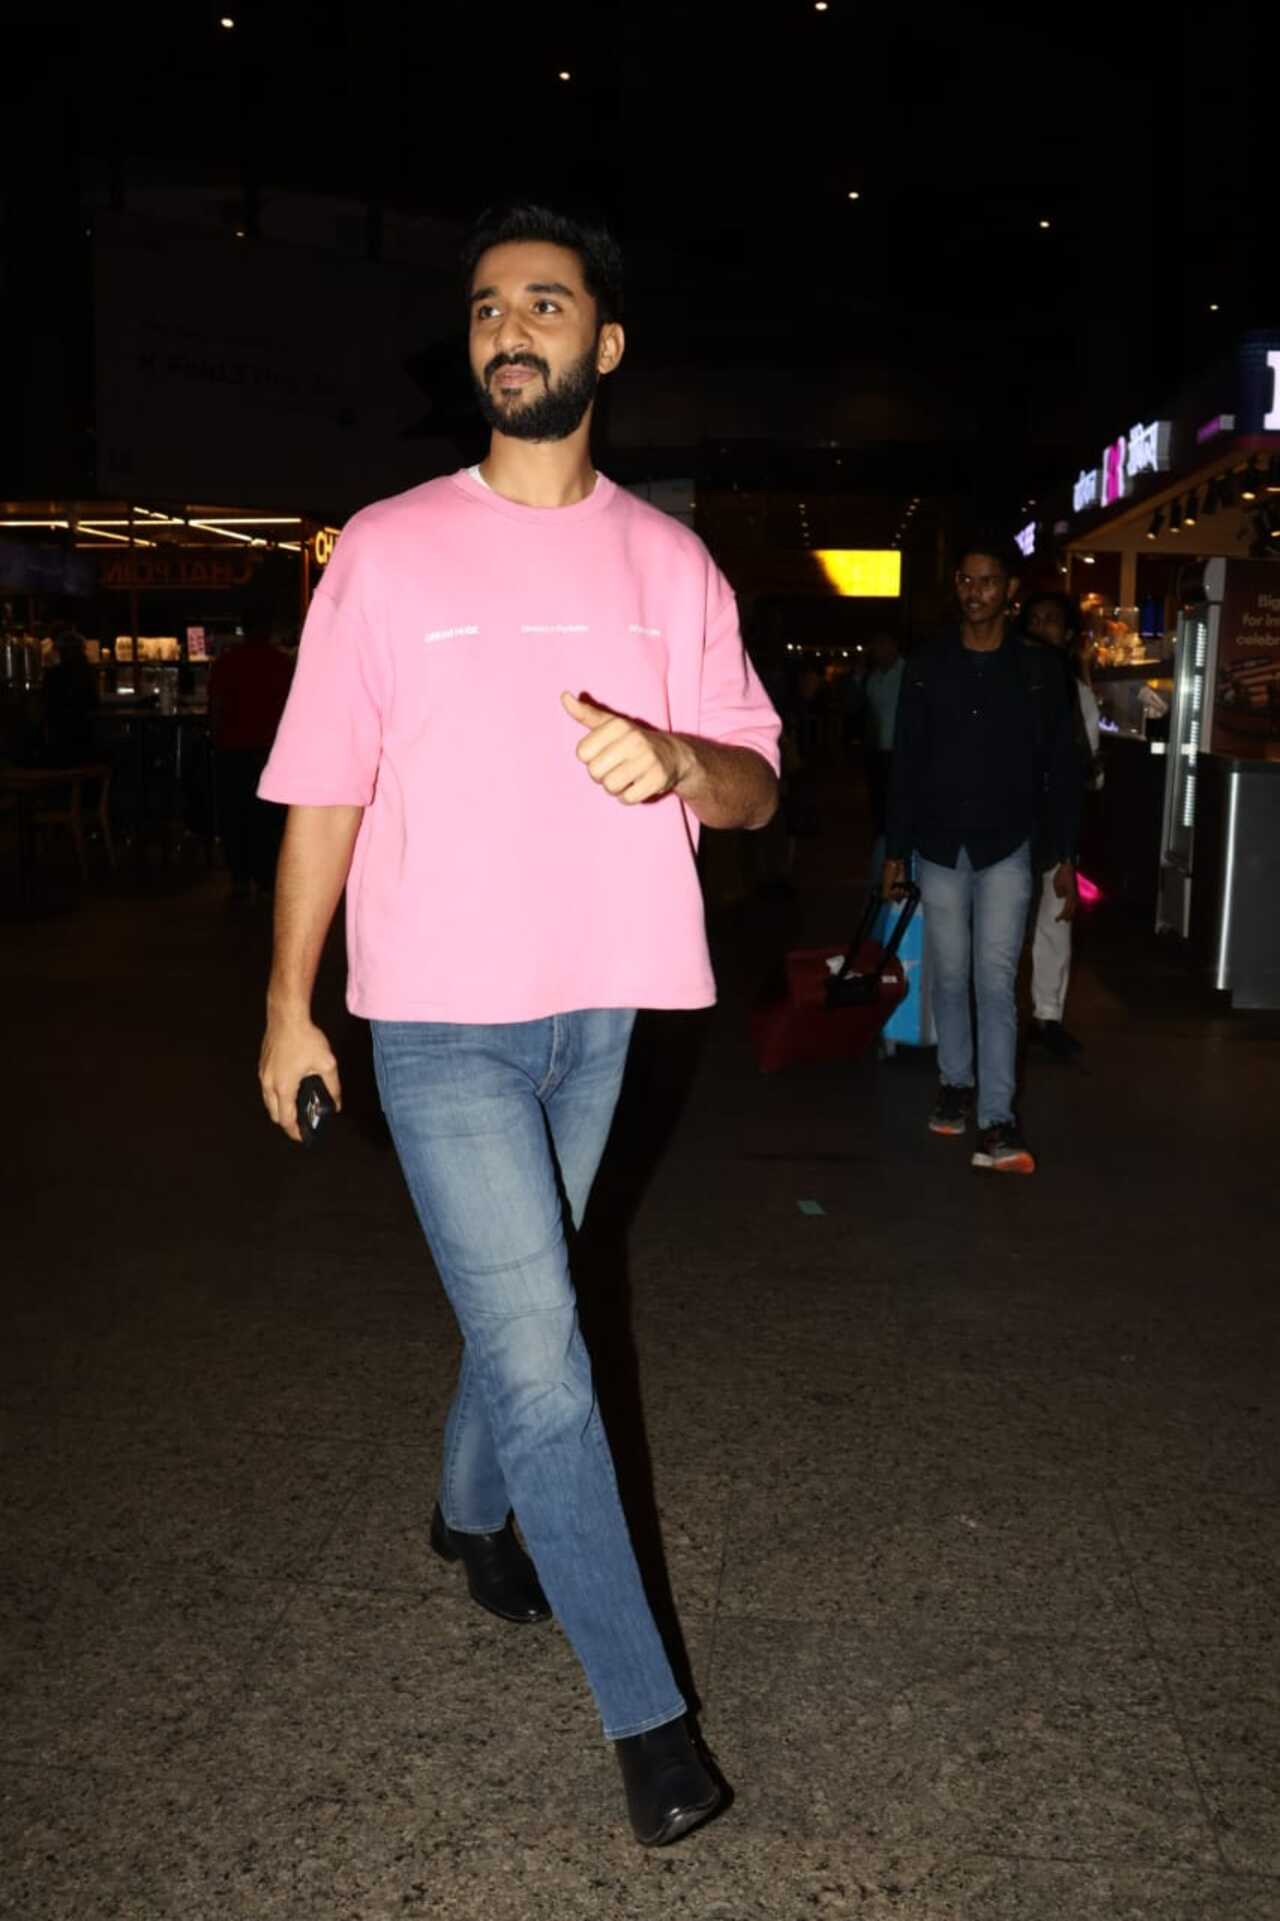 Kill actor Raghav Juyal who is garnering praise for his role as a ruthless antagonist was spotted at the Mumbai airport. 